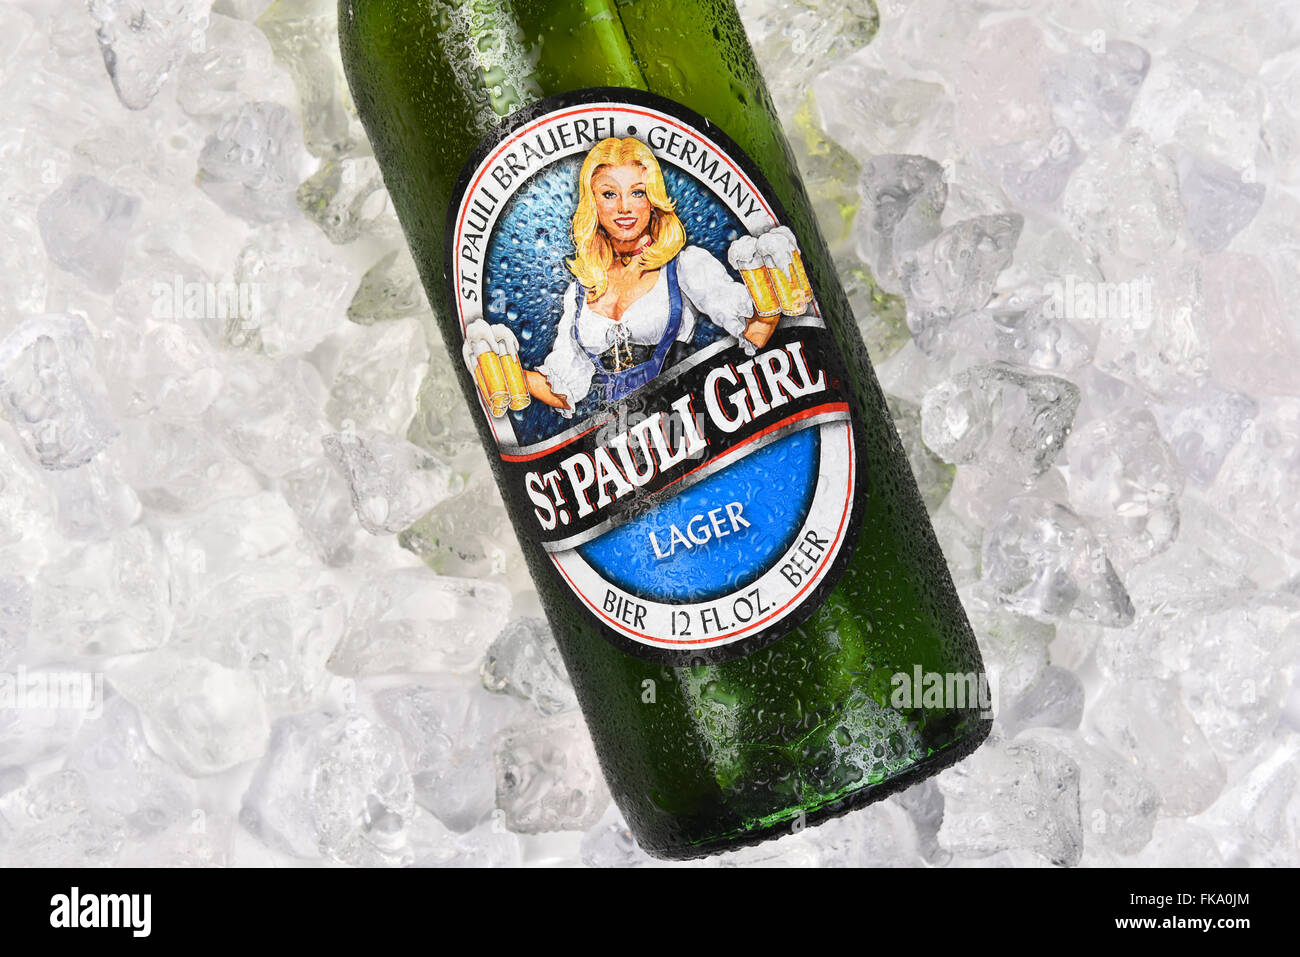 St Pauli Girl Beer Bottle on a bed of ice, Top view, horizontal format closeup of label. Stock Photo